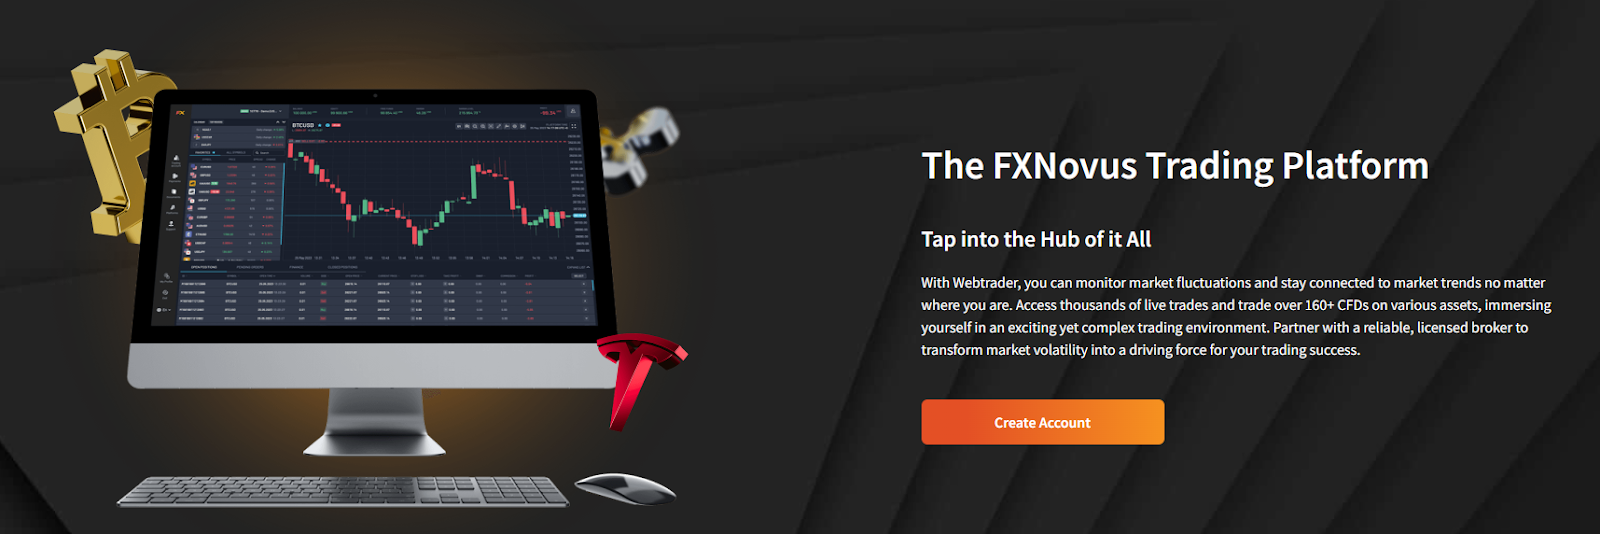 FXNovus' WebTrader platform offers real-time market data and customizable charts